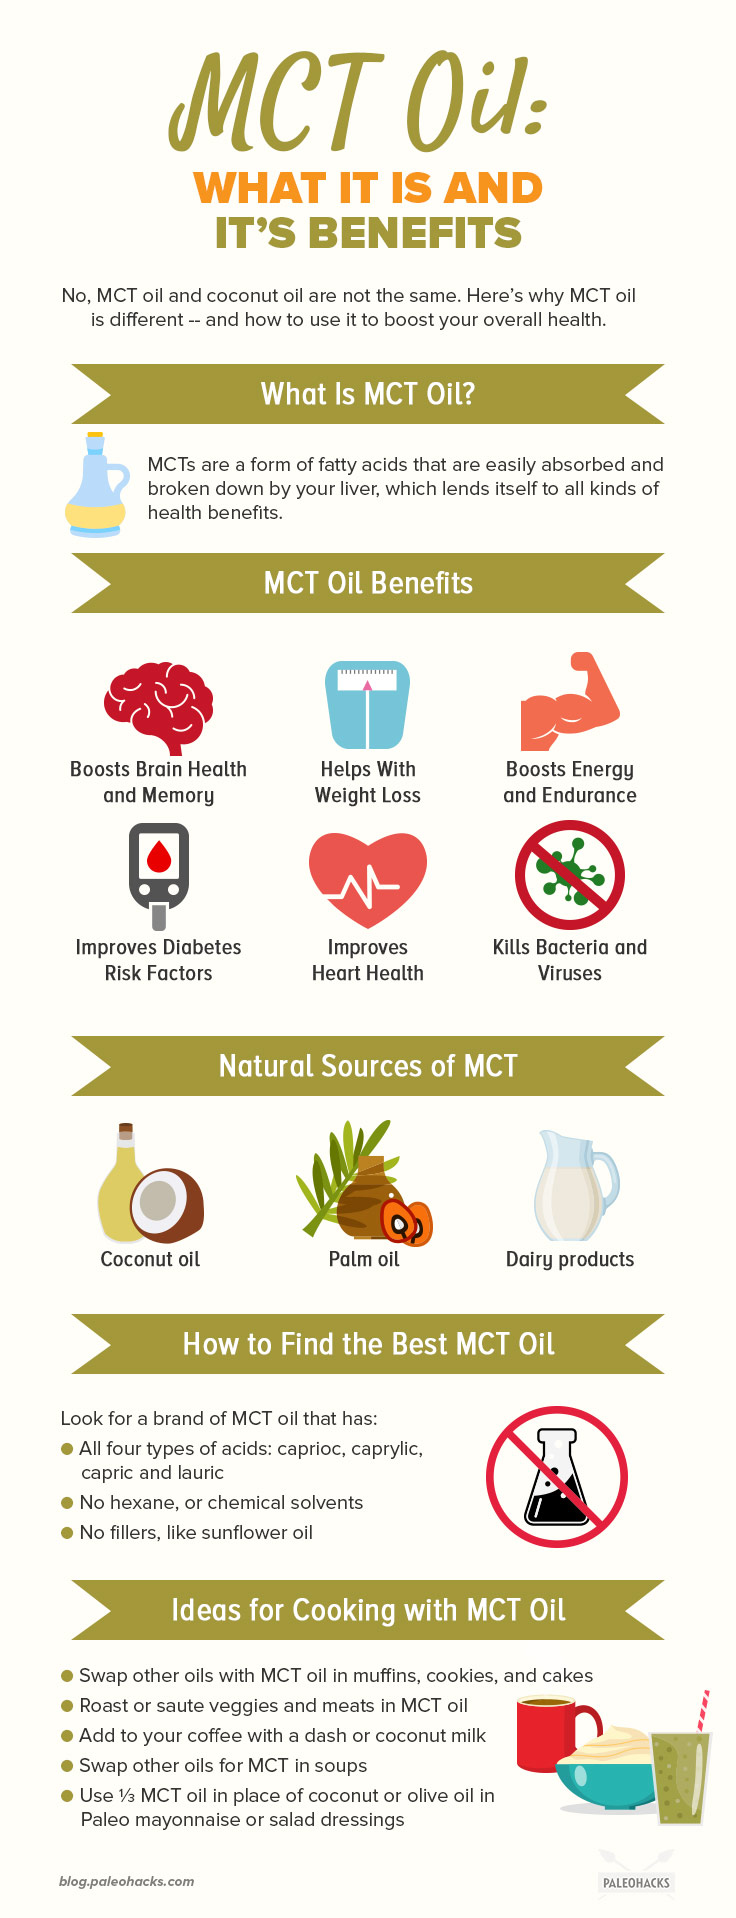 MCT oil is one of the fastest sources of energy available - and no, MCT oil isn’t coconut oil. Here's how to supplement with MCT oil to fuel your body and brain.